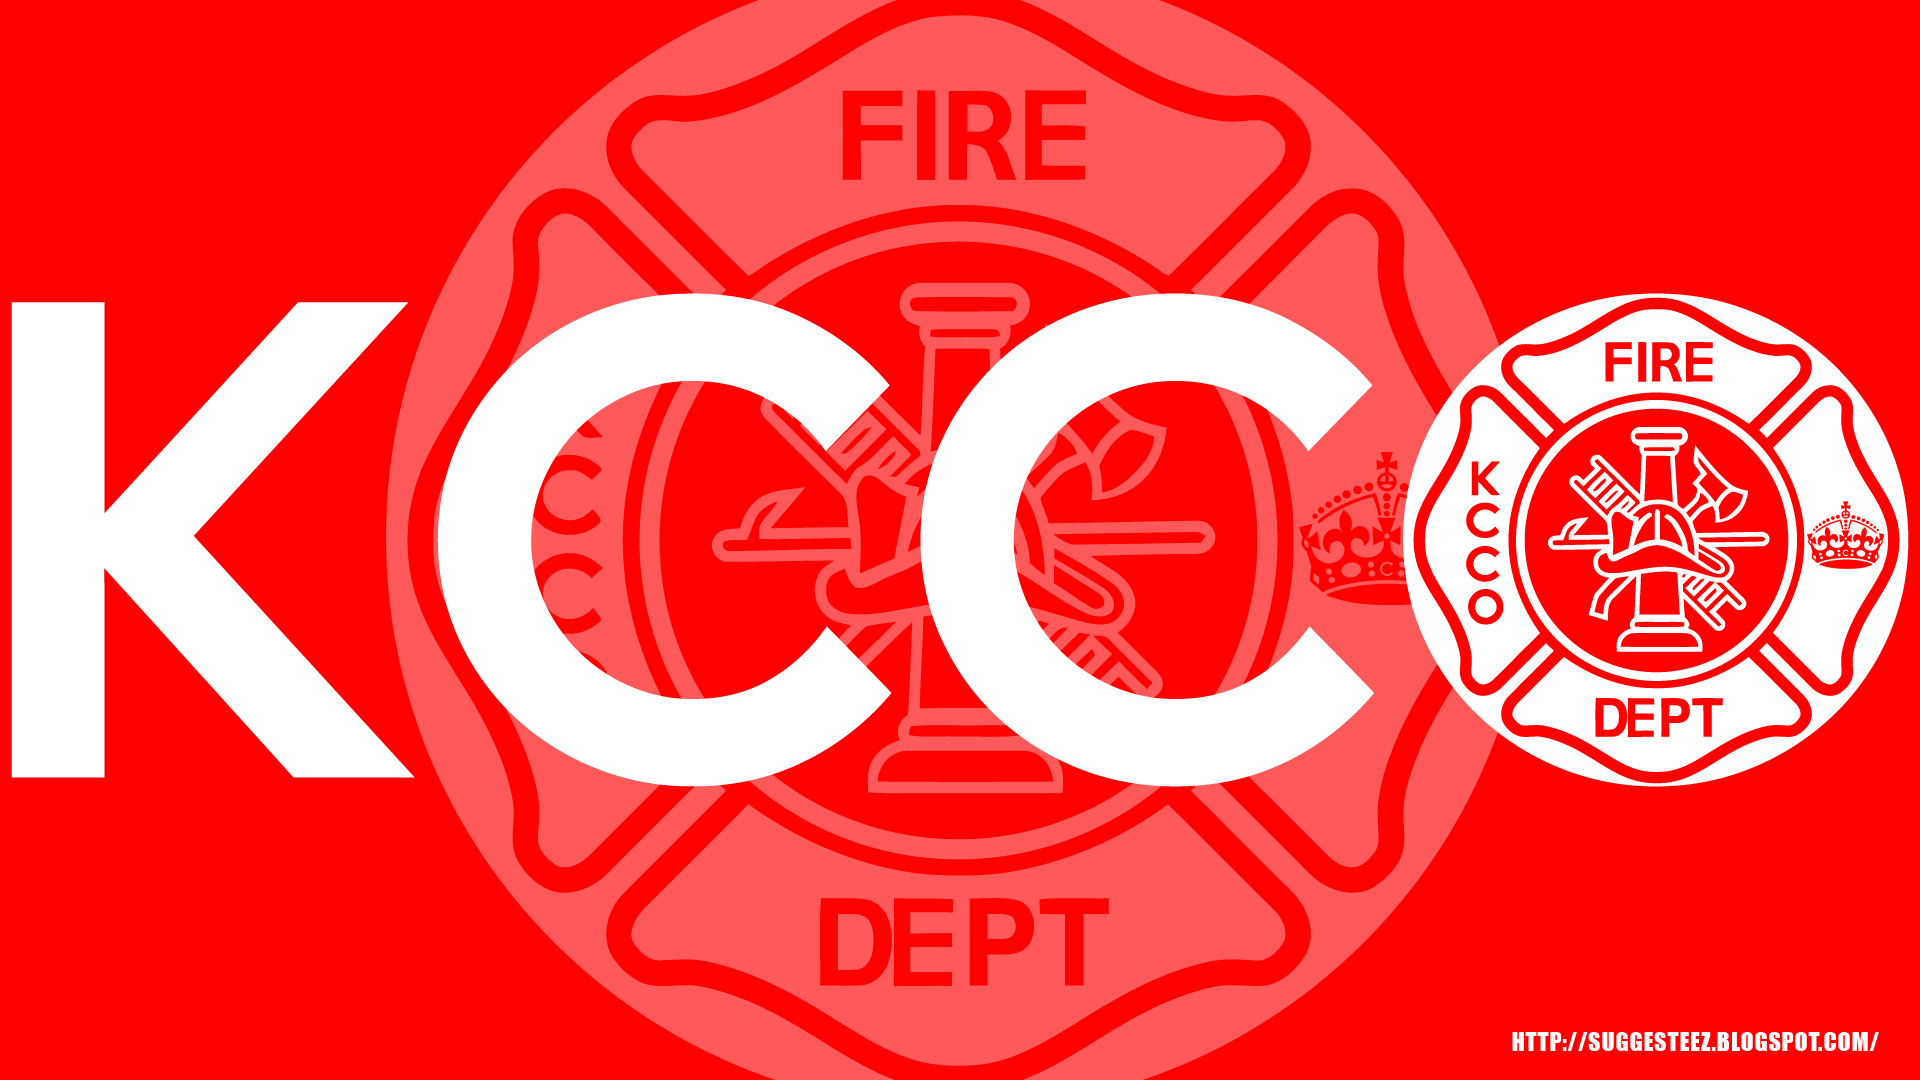 1920x1080 theCHIVE KCCO Firefighter O HD Wallpaper by suggesteez 